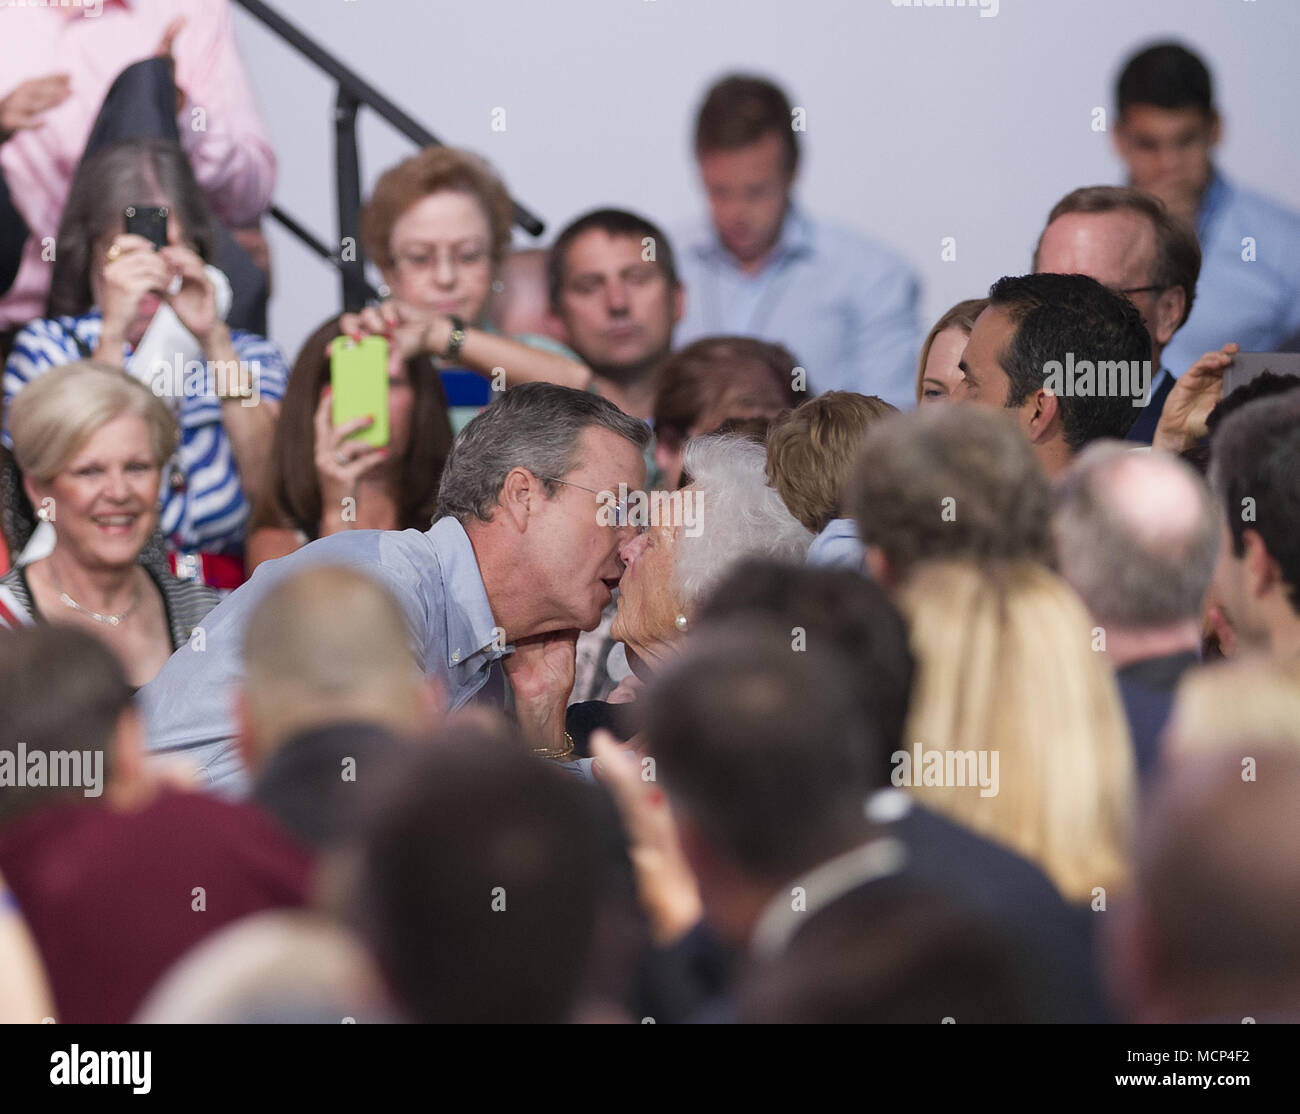 MIAMI, FL - JUNE 15: Jeb Bush looks like hes about to lock lips with mom Barbara Bush. Former Florida Governor Jeb Bush on stage to announce his candidacy for the 2016 Republican presidential nomination at Miami Dade College - Kendall Campus Theodore Gibson Health Center (Gymnasium) June 15, 2015 in Miami, Florida. John Ellis 'Jeb' Bush will attempt to follow his brother and father into the nation's highest office when he officially announces today that he'll run for president of the United States. People: Jeb Bush, Barbara Bush Credit: hoo-me.com/MediaPunch/MediaPunch Stock Photo